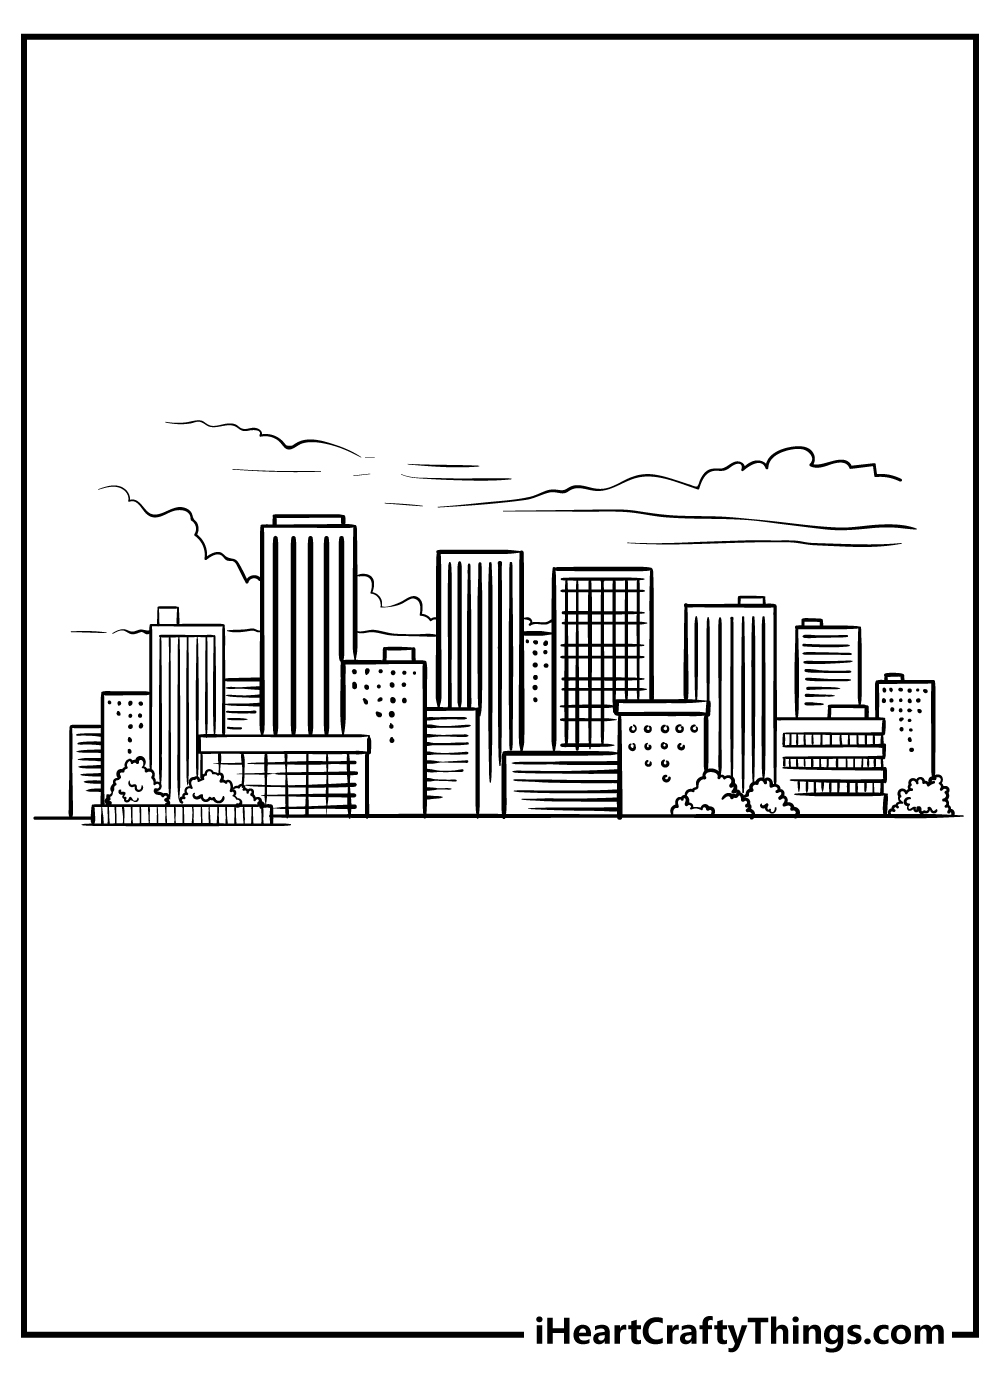 Metropolis Coloring Pages for adults free printable